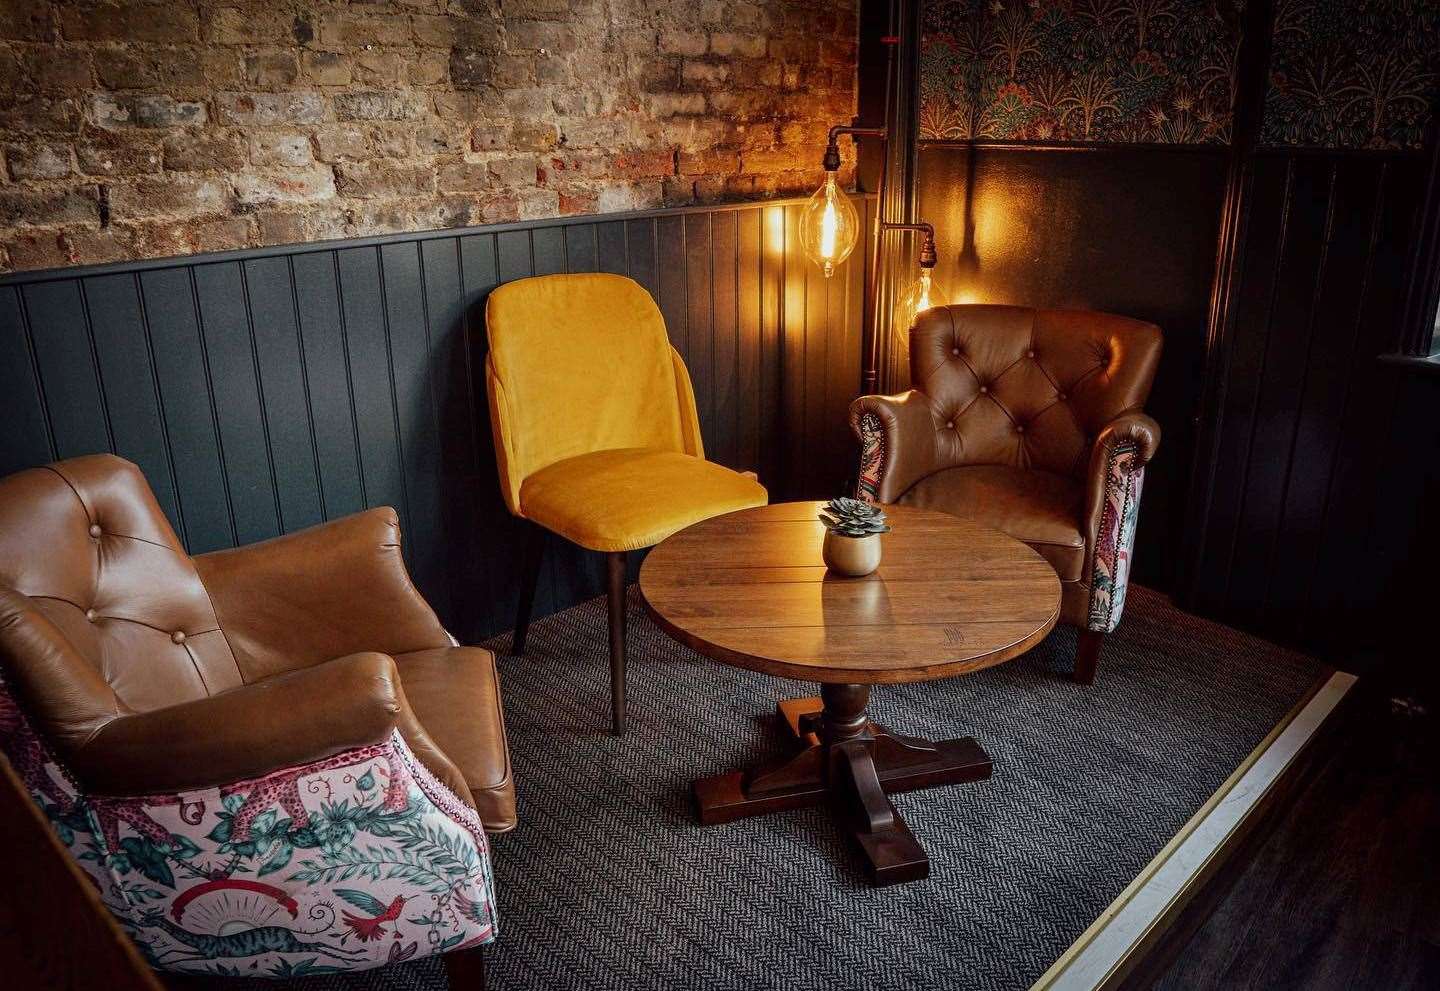 New furniture and furnishings at the Rochester pub